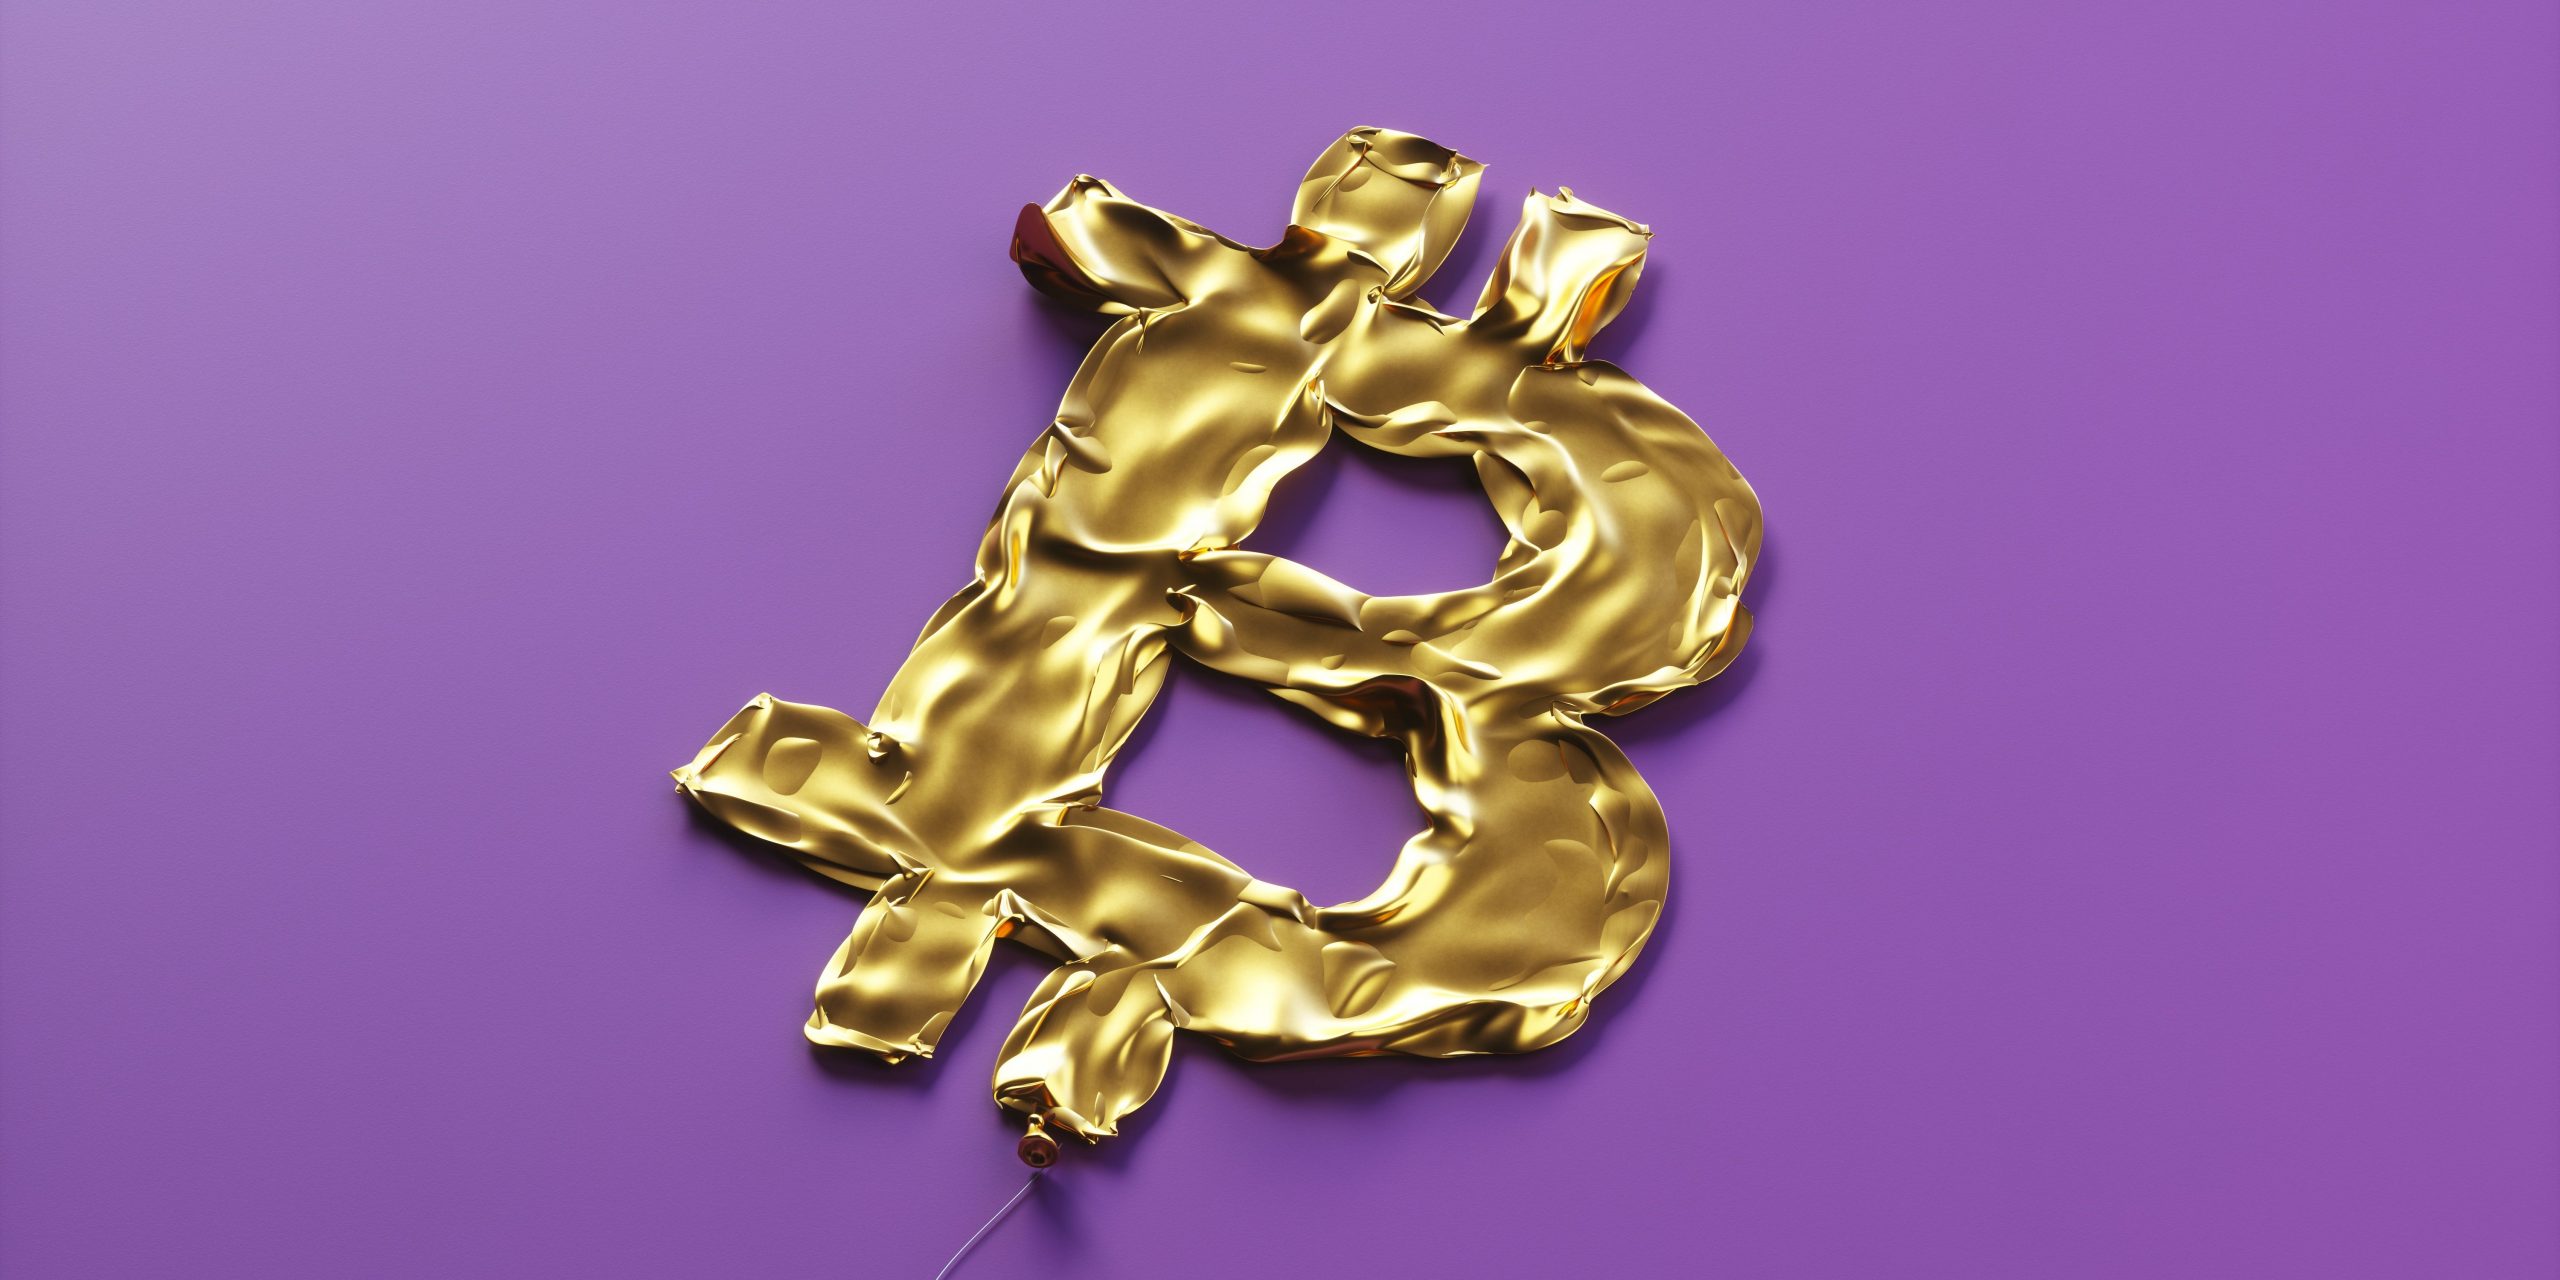 Purple and gold bitcoin